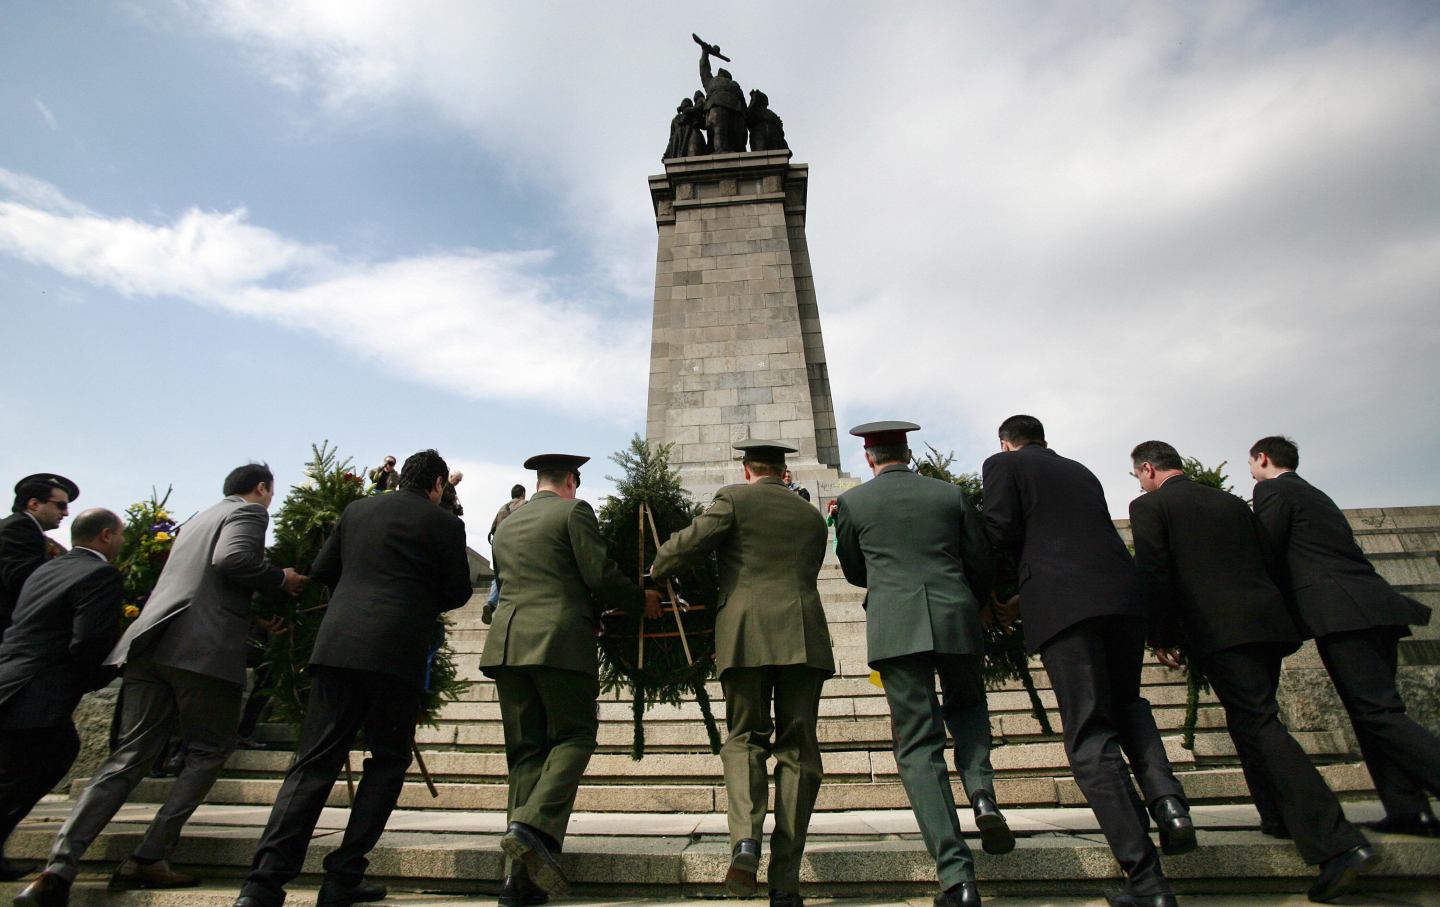 World War II veterans and military men pay their respect as they lay wreaths at the monument of the Soviet Army in central Sofia on May 9, 2008.